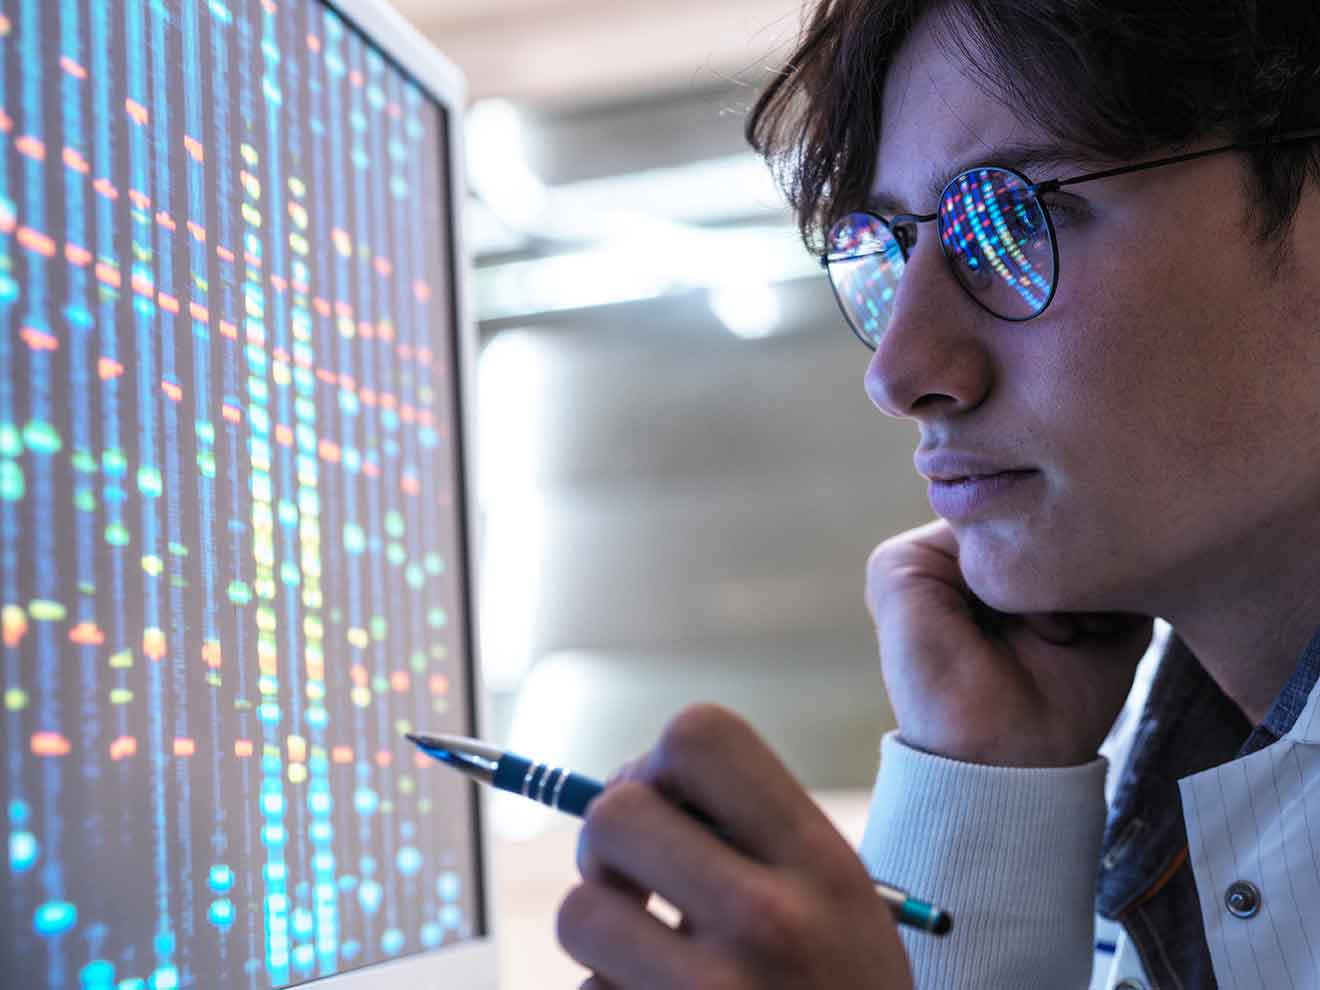 Male teenage expert analyzing DNA through computer at laboratory